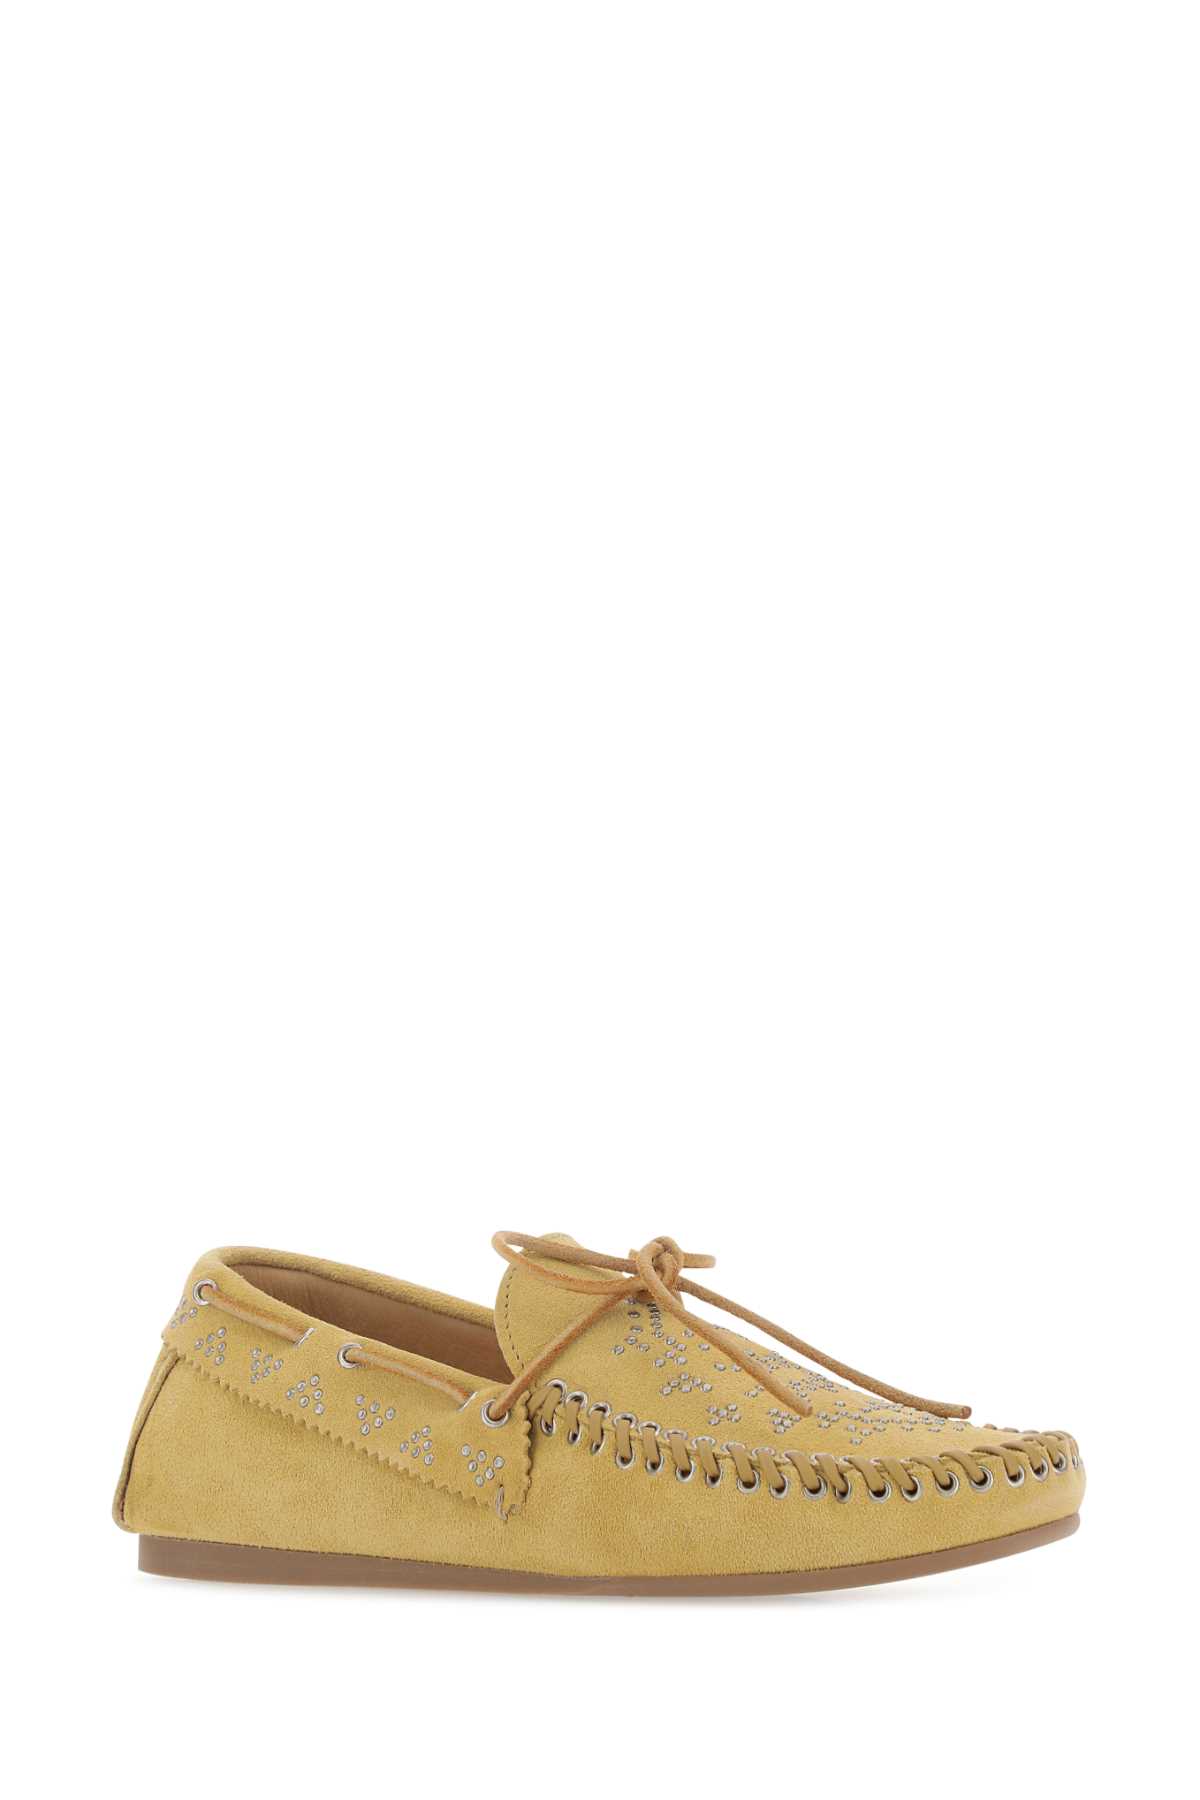 ISABEL MARANT MUSTARD SUEDE FREEN LOAFERS